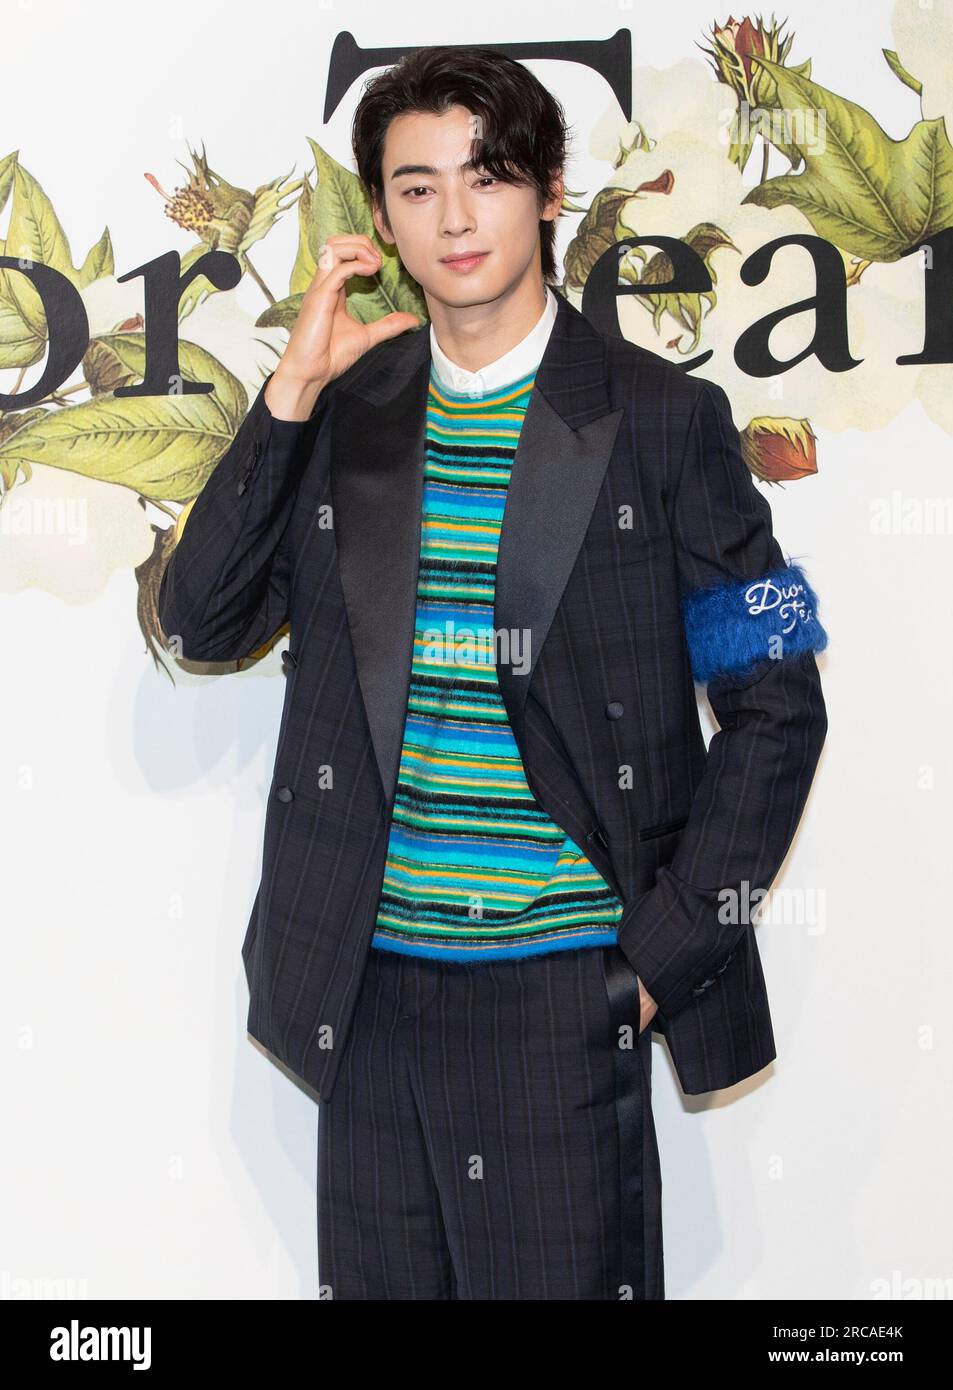 Seoul, South Korea. 13th July, 2023. South Korean actor Cha Eun-woo,  attends a photocall for the Dior Tears Collection Pop-Up Store event in  Seoul, South Korea on July 13, 2023. (Photo by